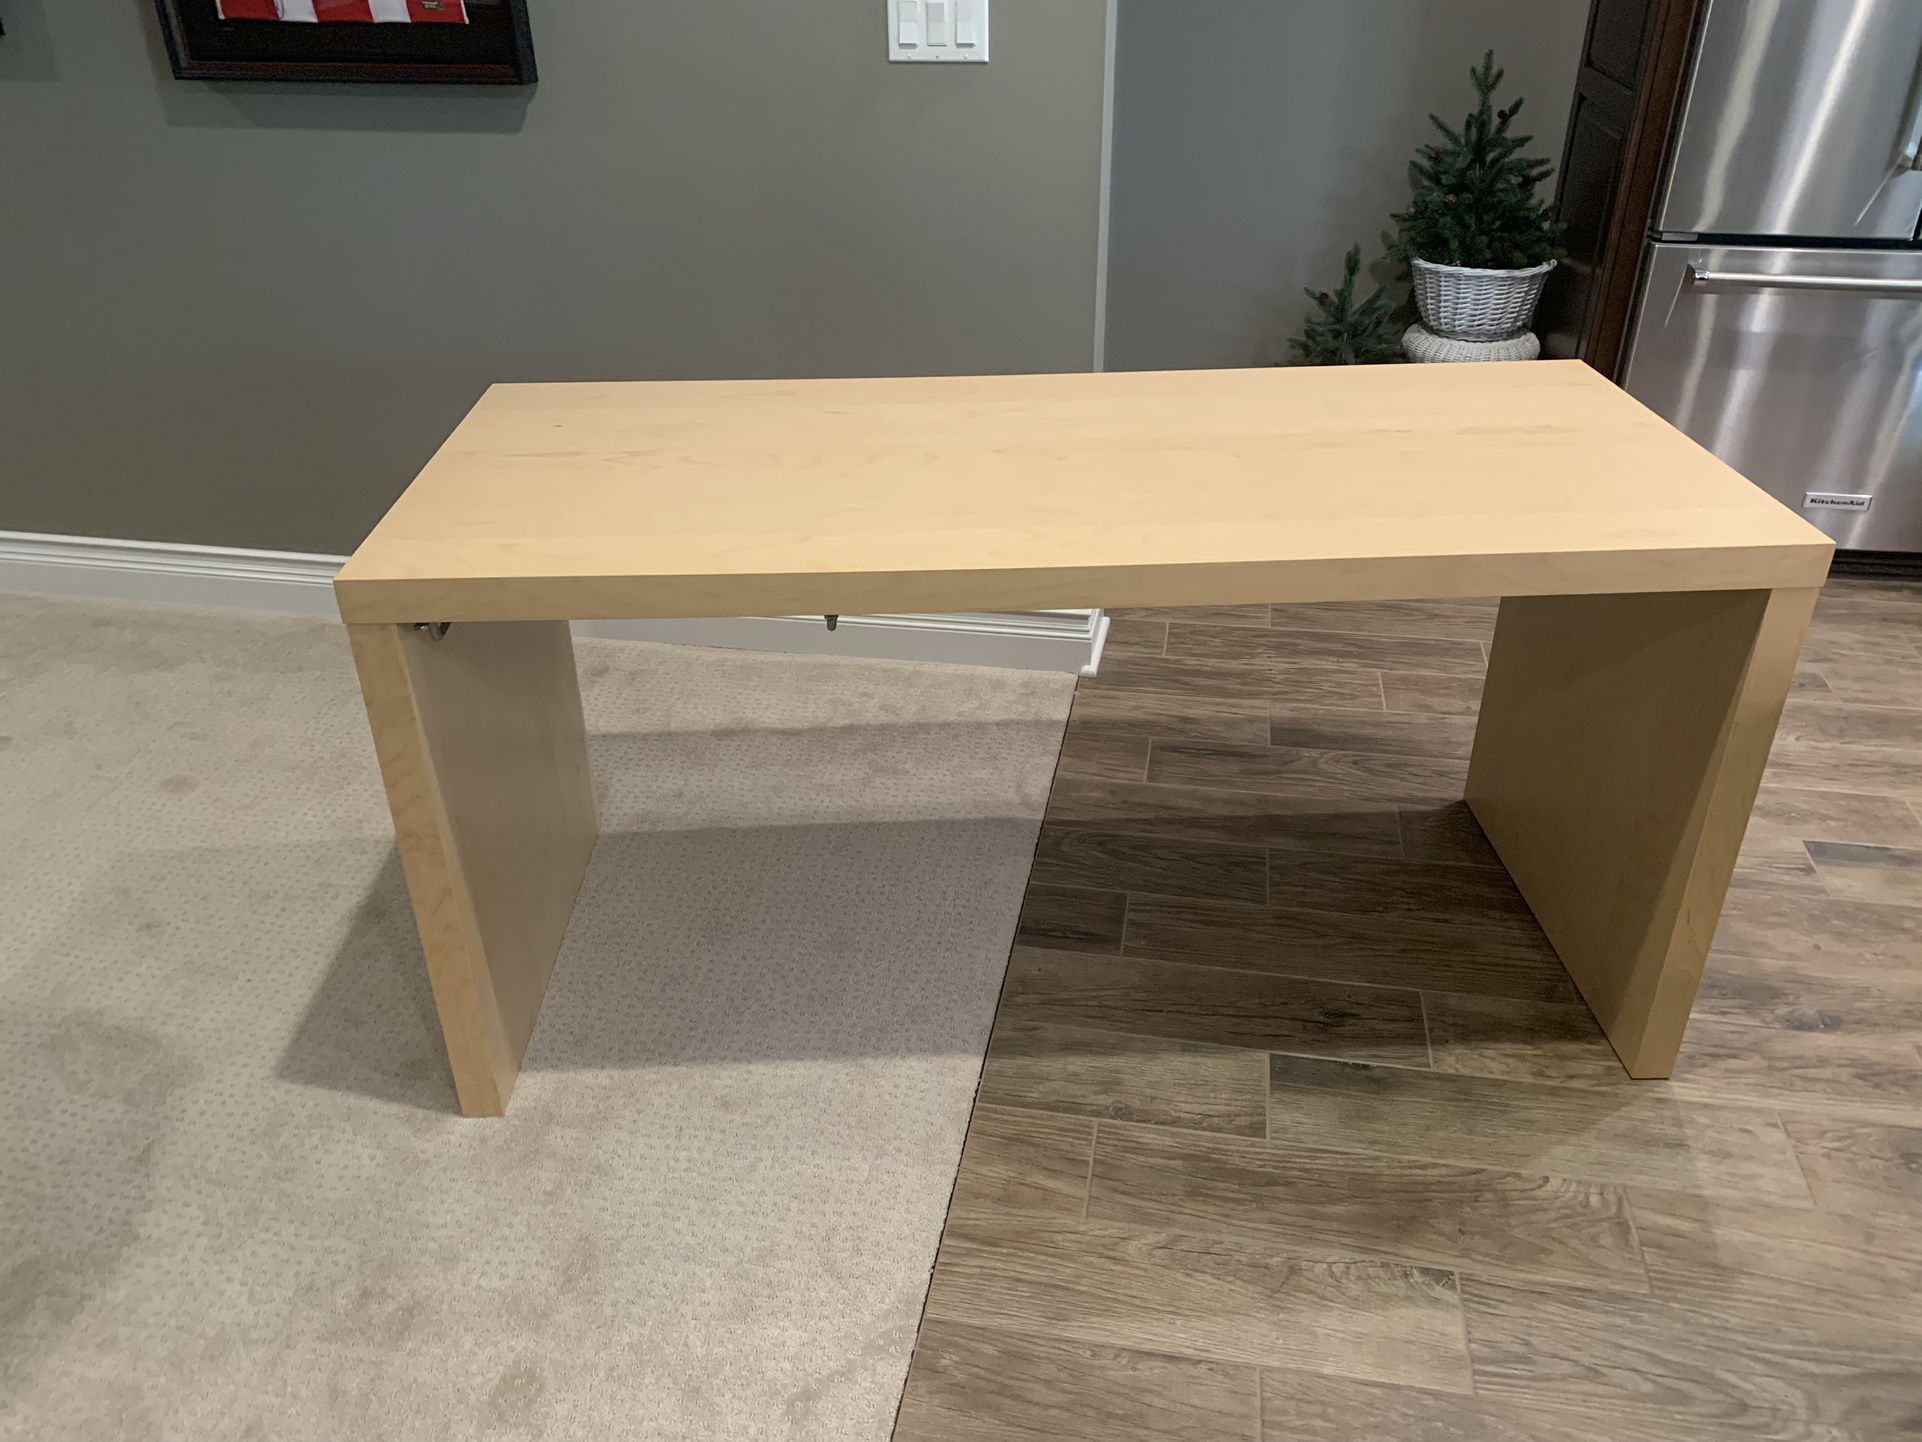 IKEA Malm Desk With Pull Out Panel 